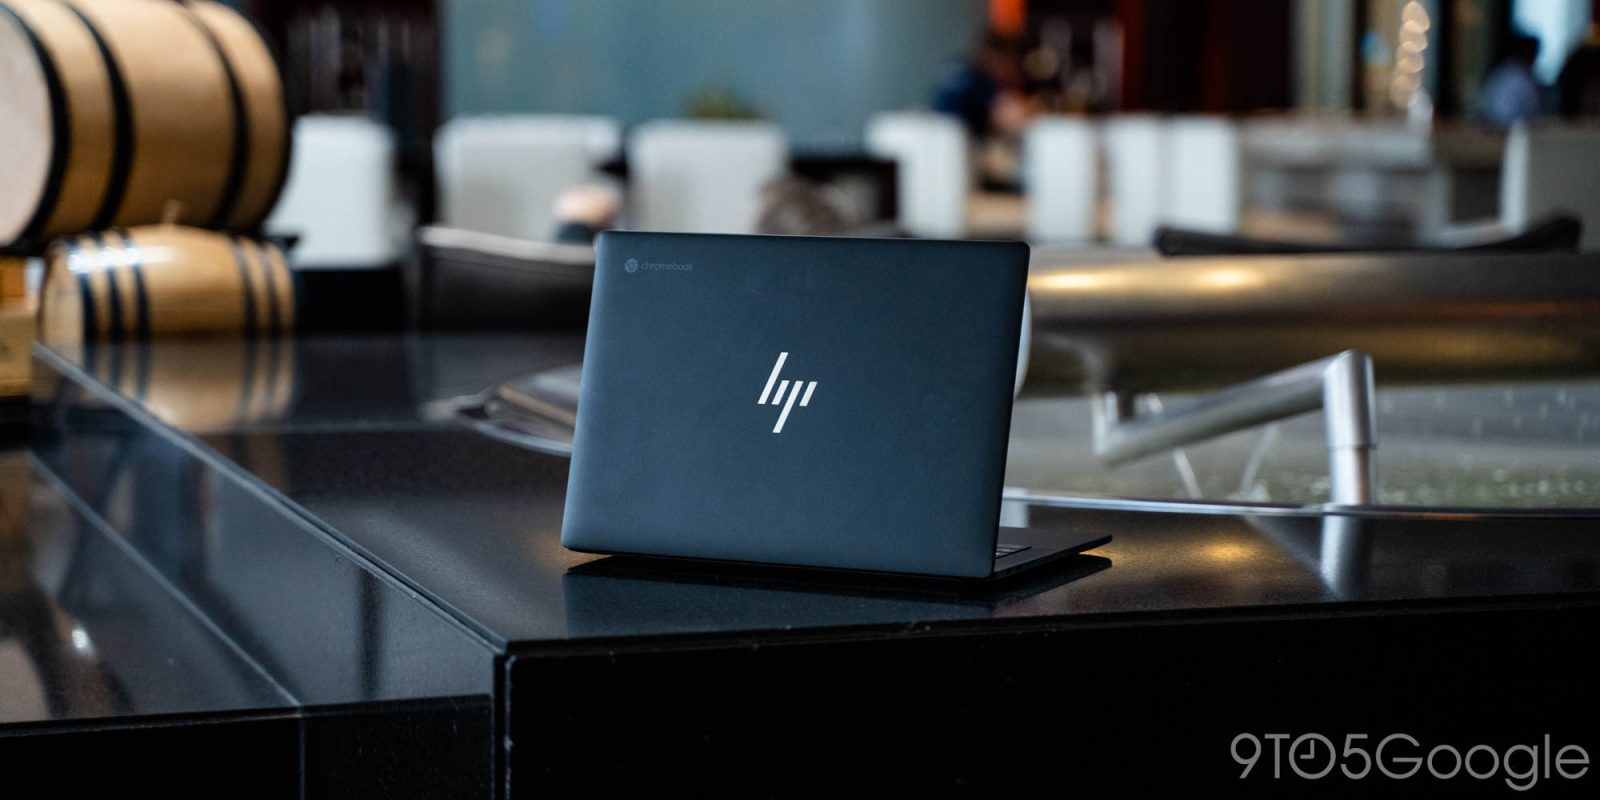 HP Dragonfly Pro Chromebook Review: Best of ChromeOS